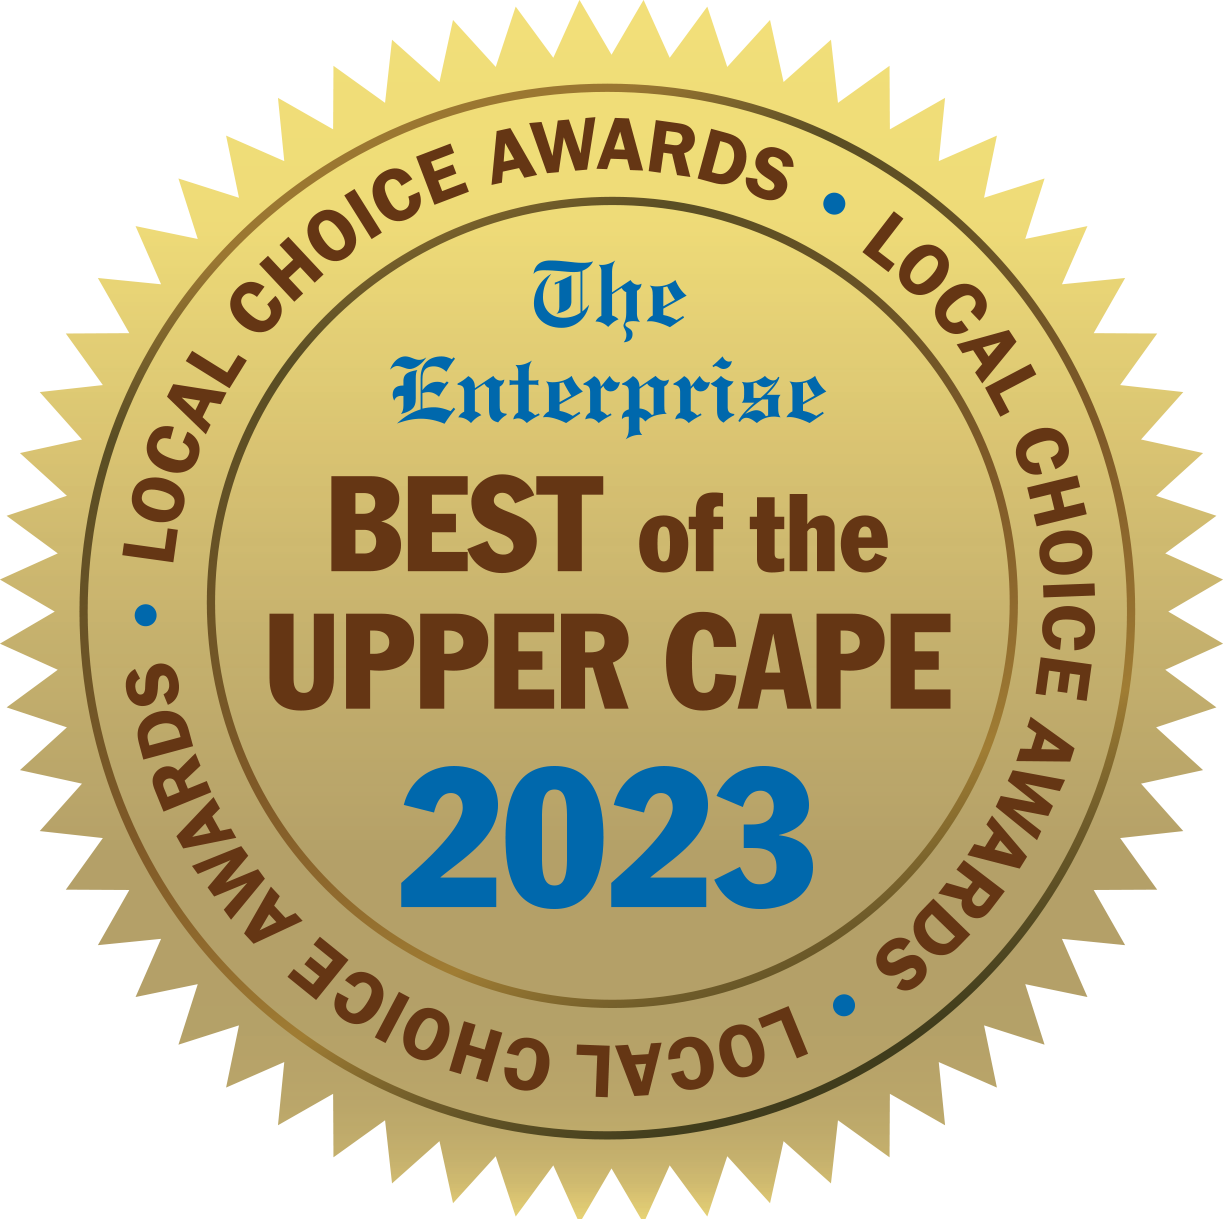 Best of the Upper Cape 2023